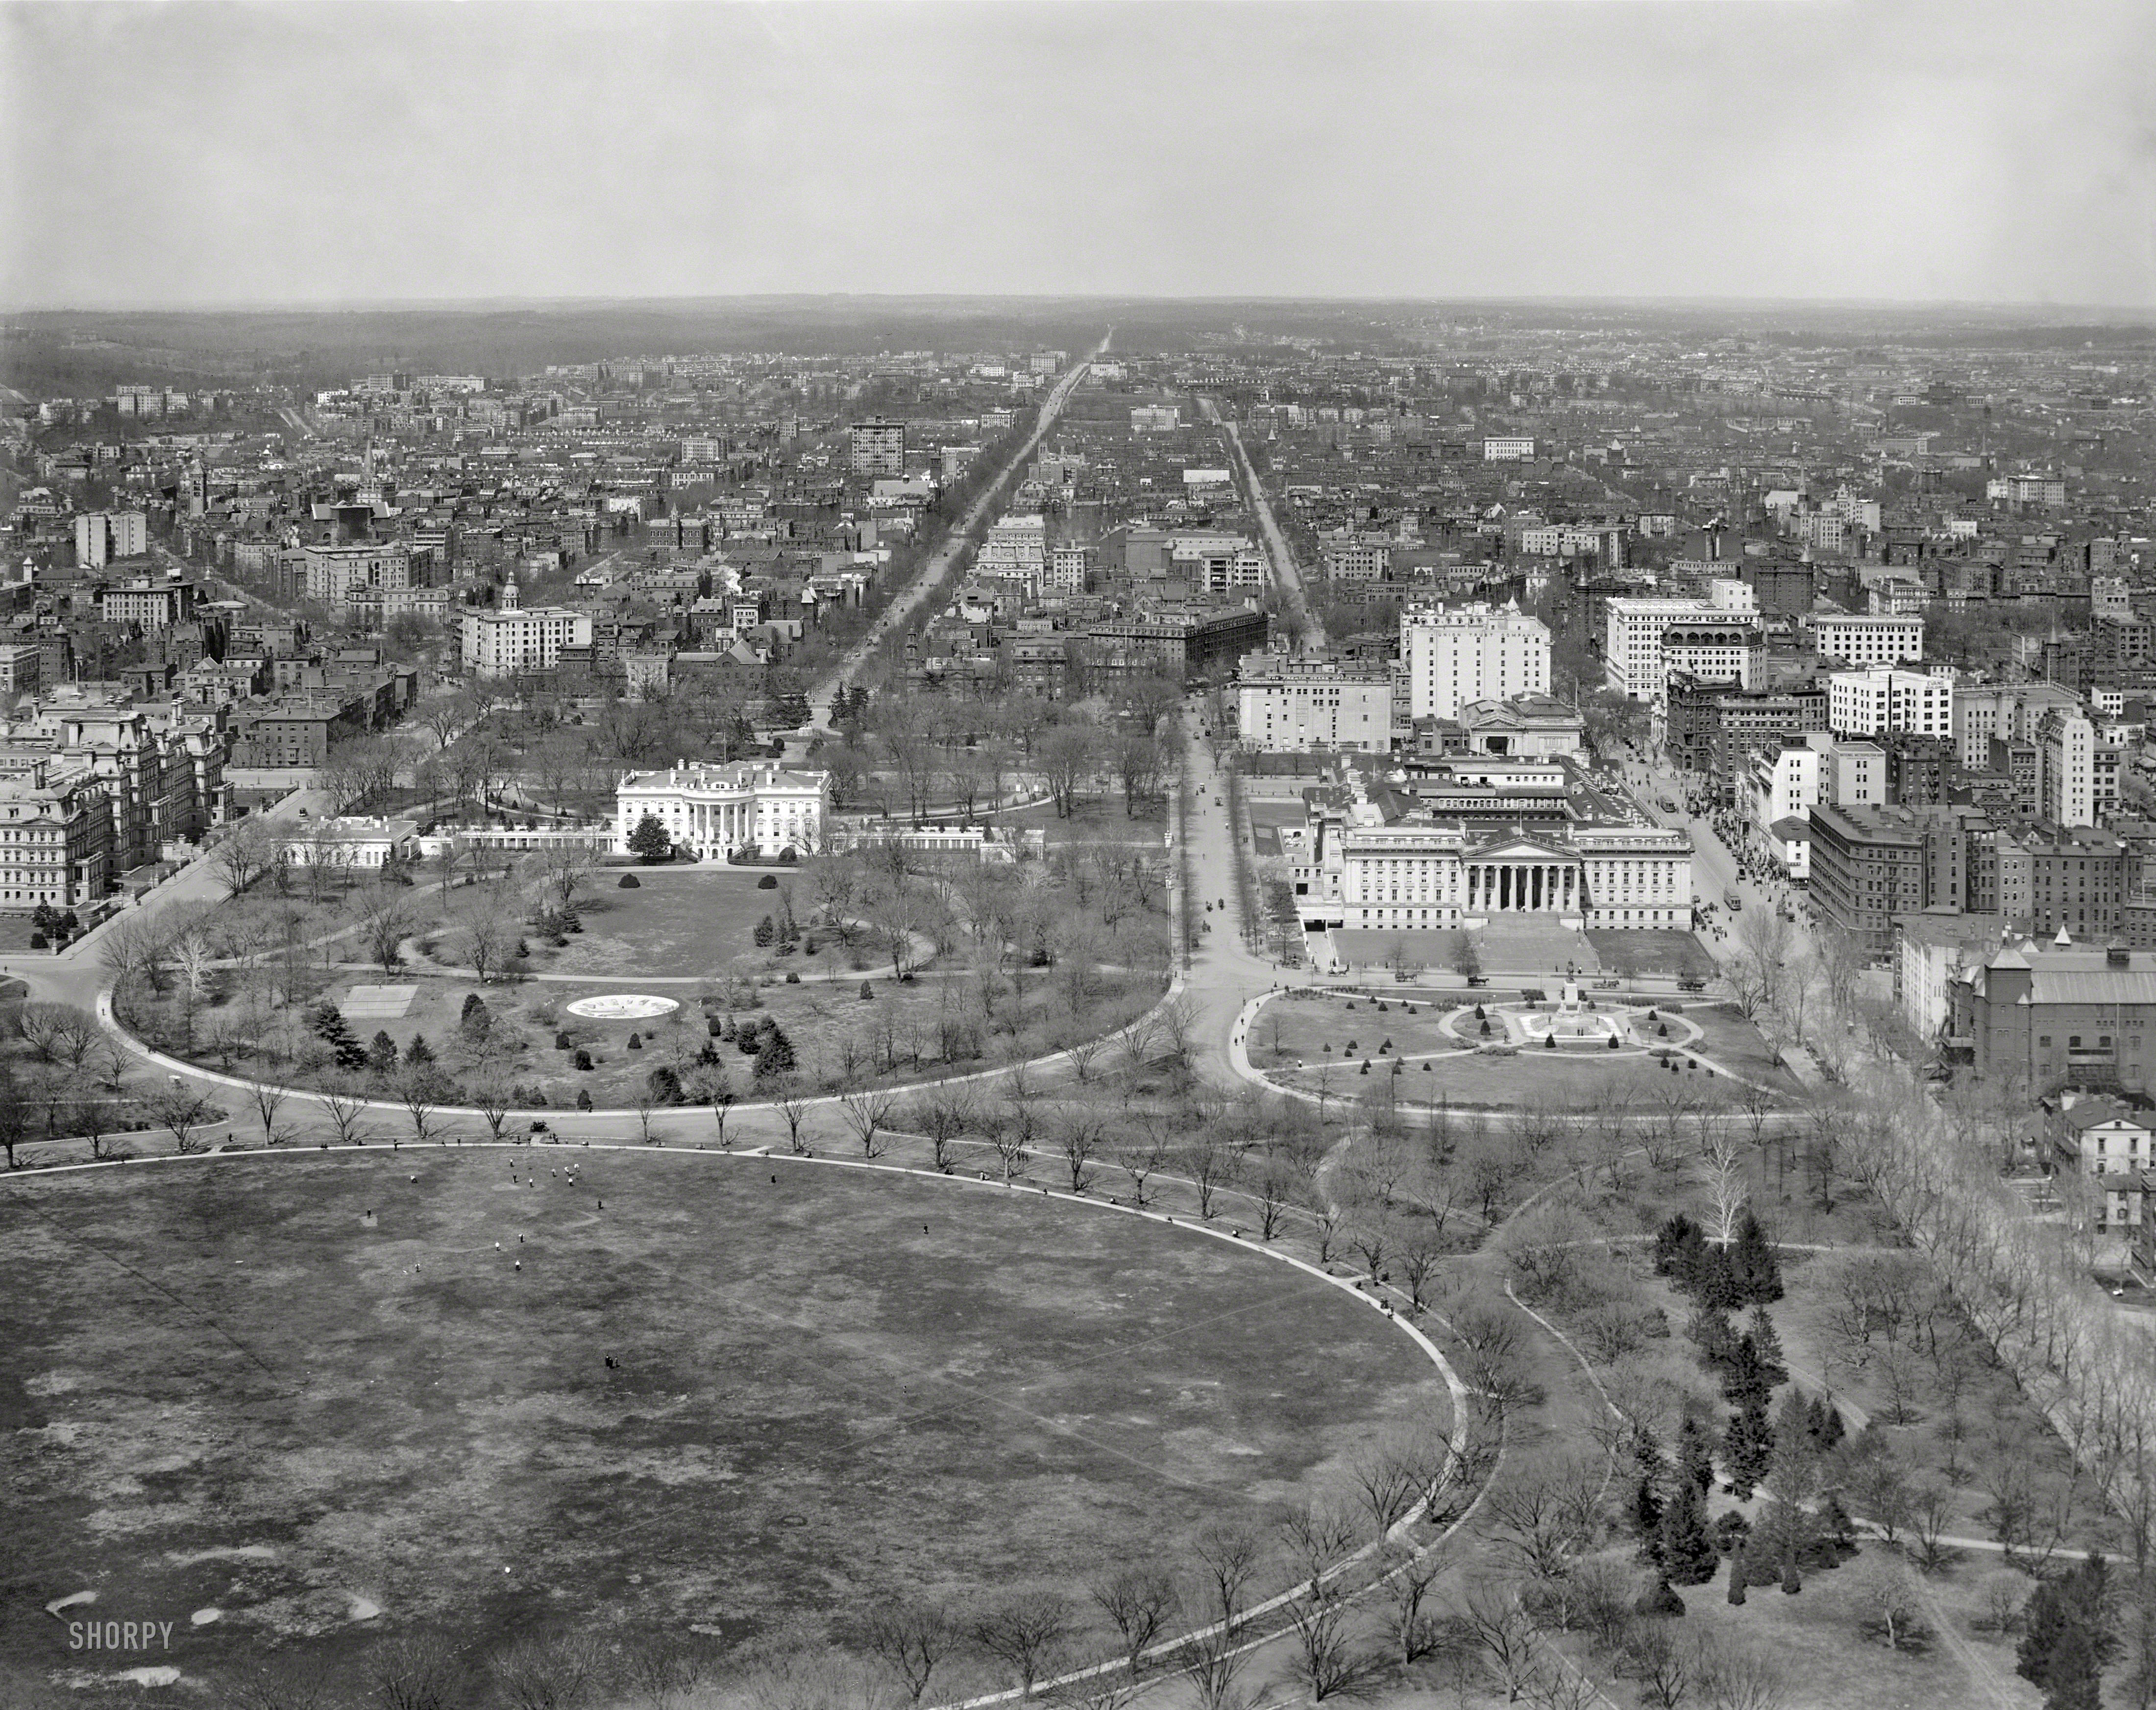 Circa 1911, our second selection from the panoramic series "Washington from Washington Monument." Landmarks include the State, War & Navy Building at left; the White House and Ellipse; and U.S. Treasury. 8x10 inch dry plate glass negative, Detroit Publishing Company. View full size.